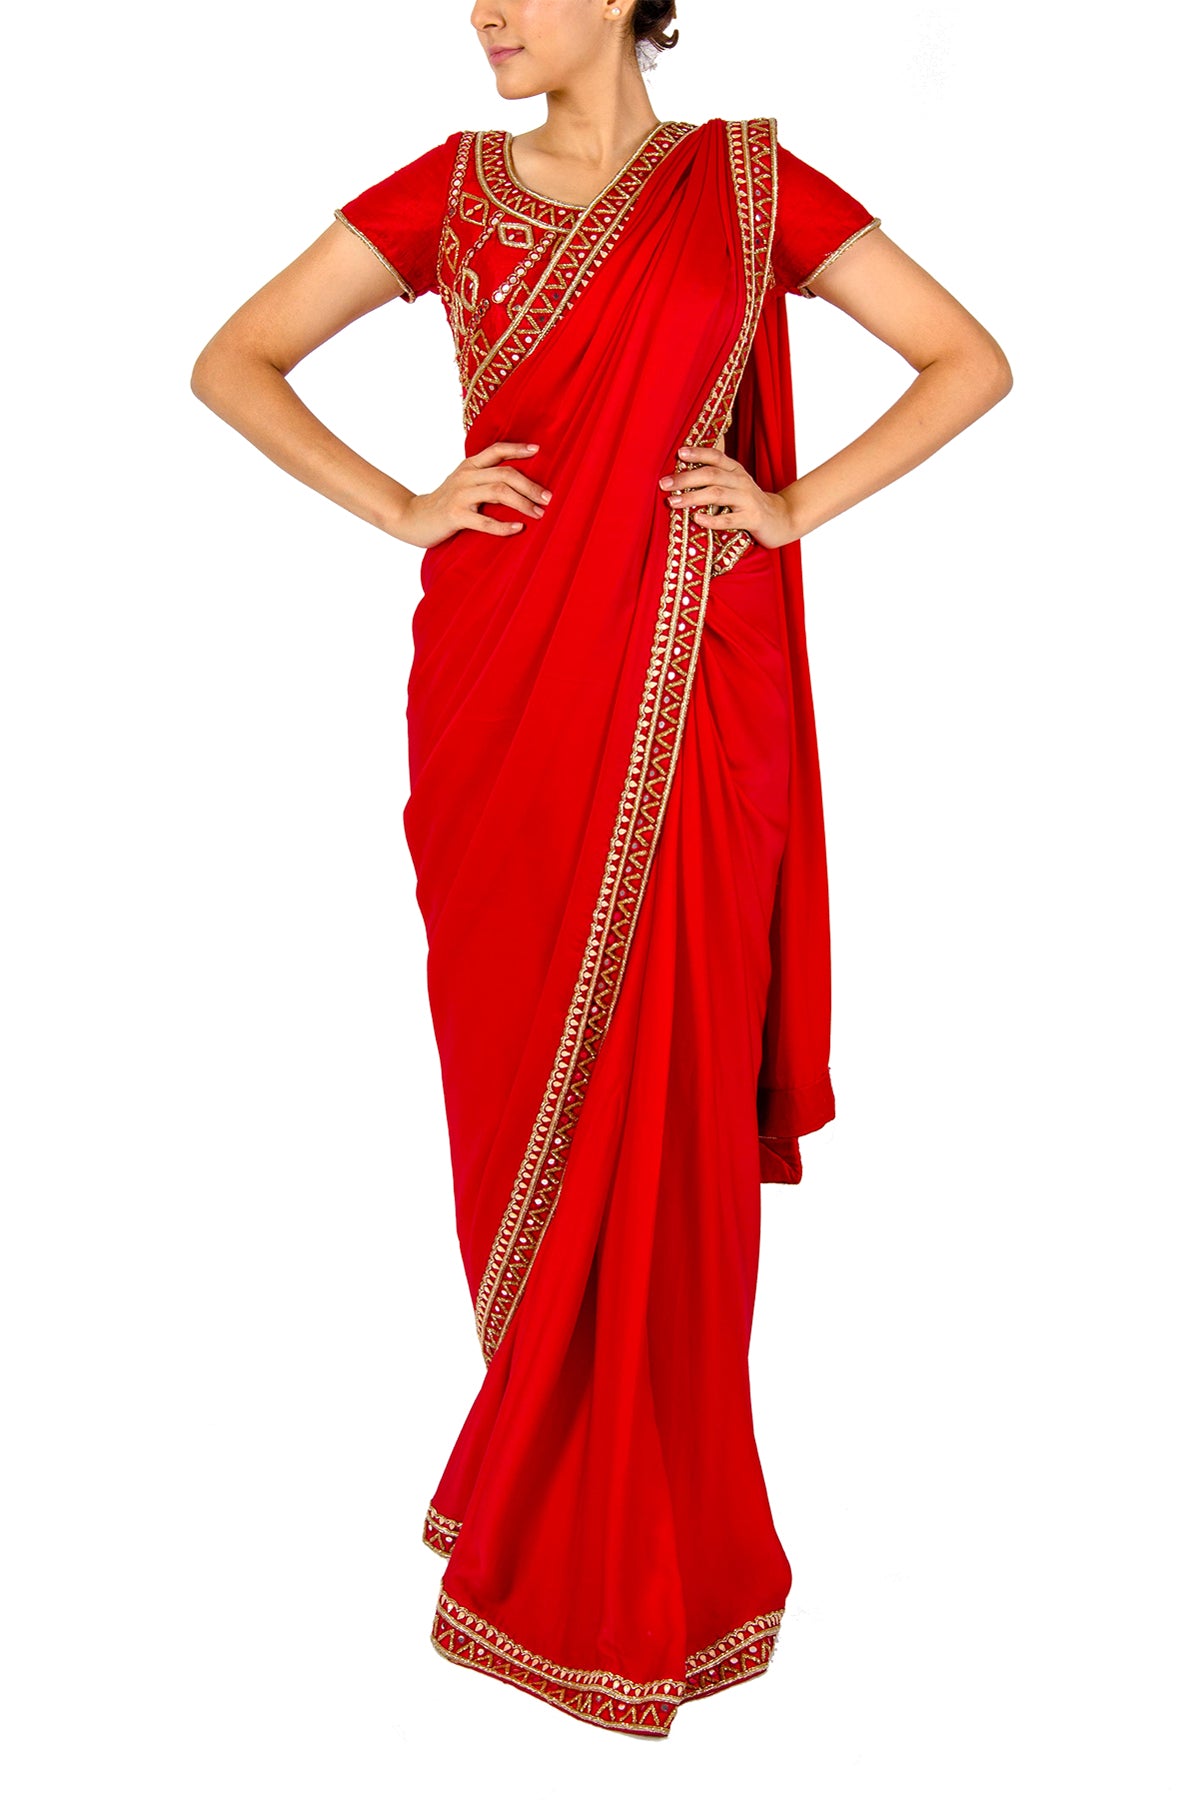 Red Crepe Satin Two Toned Saree With Mirror Work Border On Both Sides. Please note that the blouse and petticoat are not included. The piece flashes itself and turns heads. 